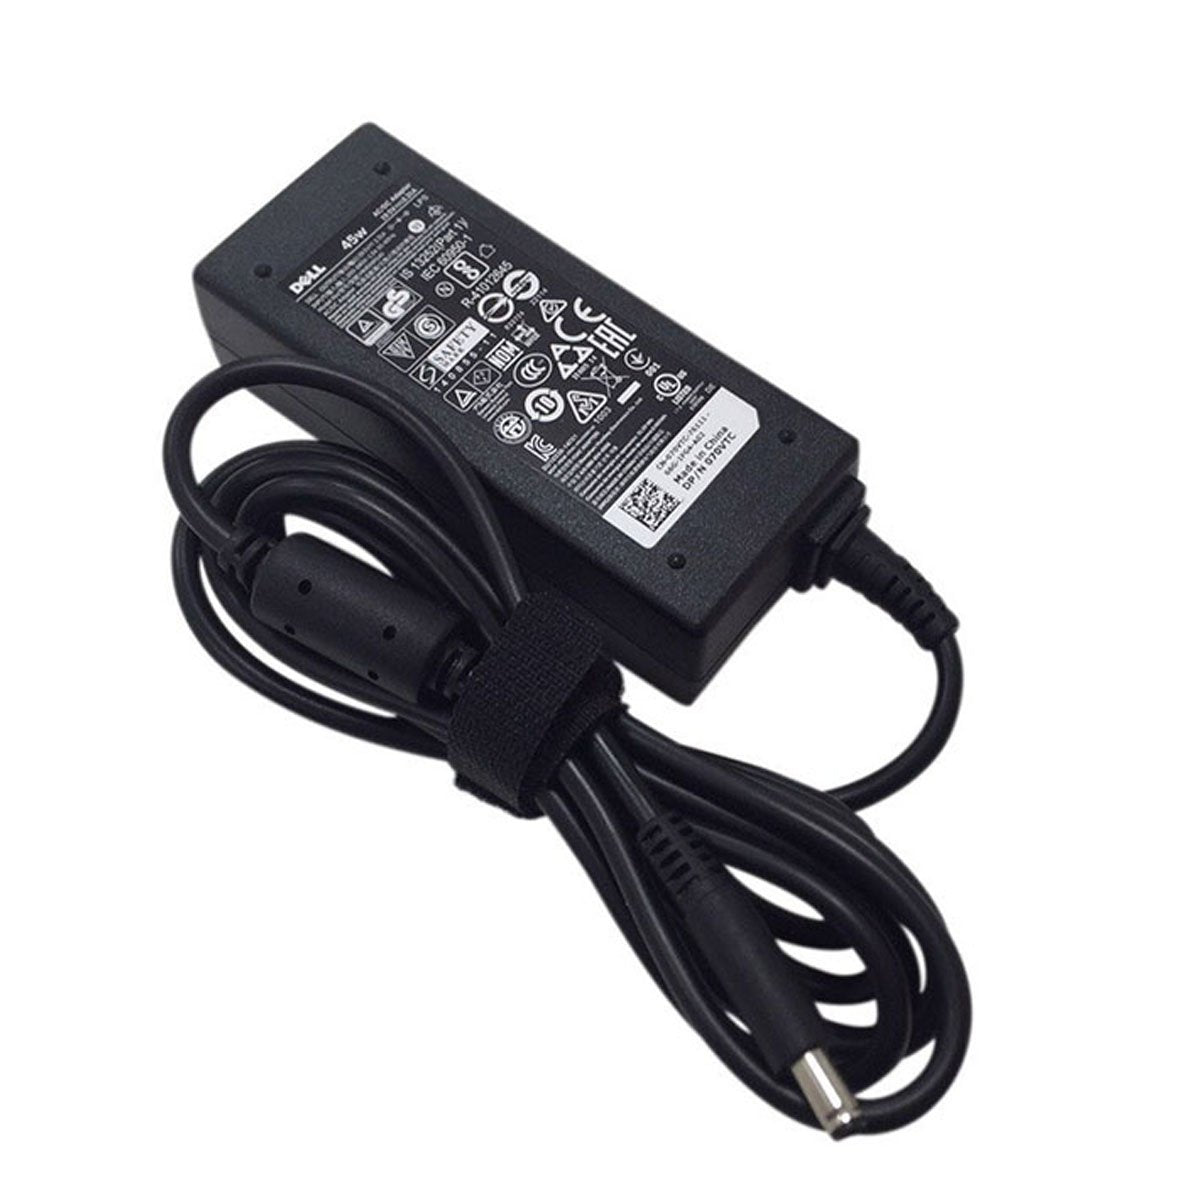 Dell XPS 13 L321X Original 45W Laptop Charger Adapter With Power Cord 19.5V 4.5mm Pin